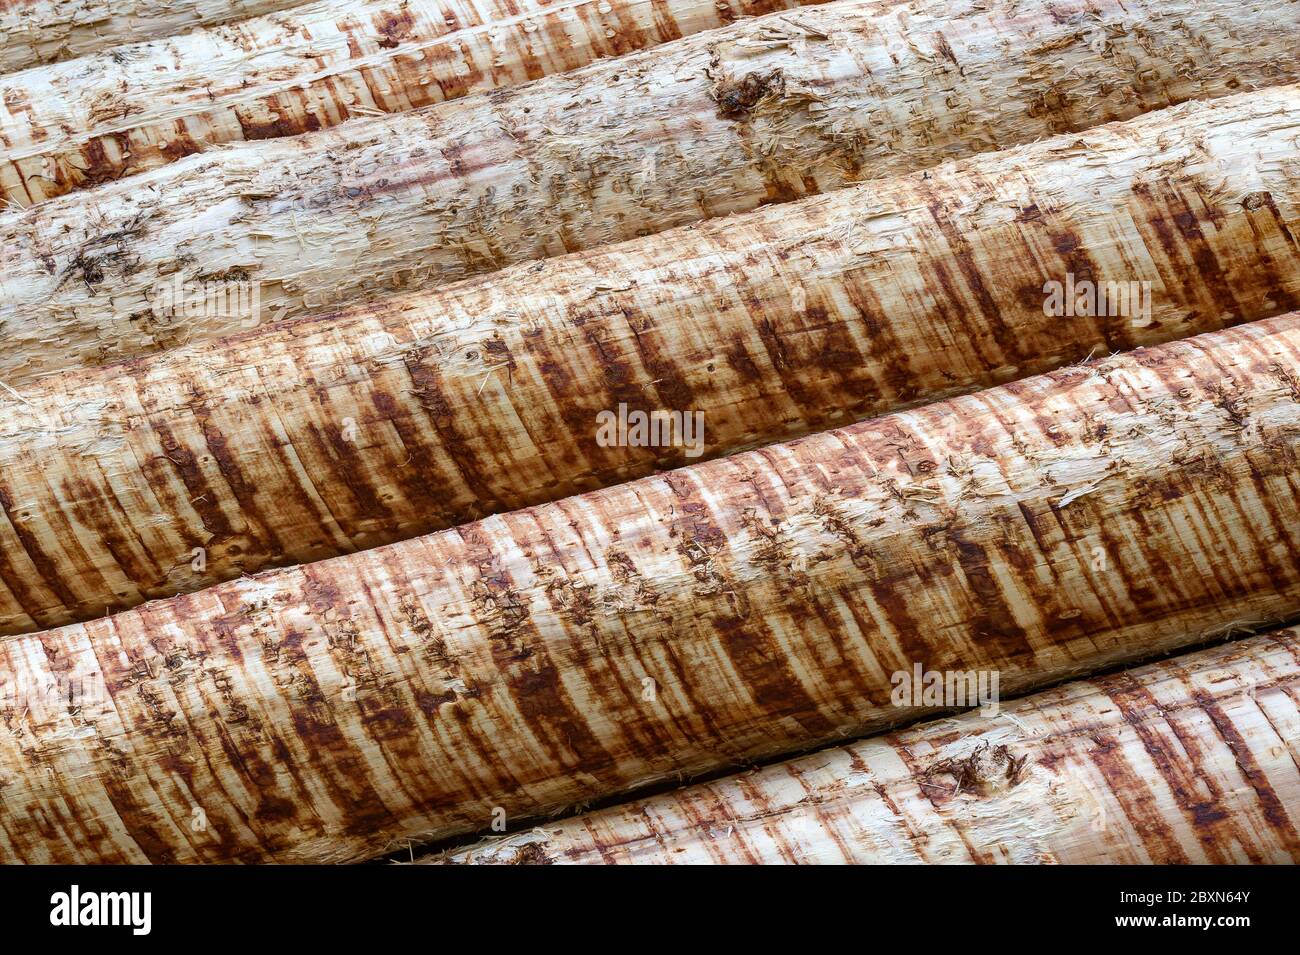 Debarked tree trunks. Debarking promotes the drying of the wood. Stock Photo